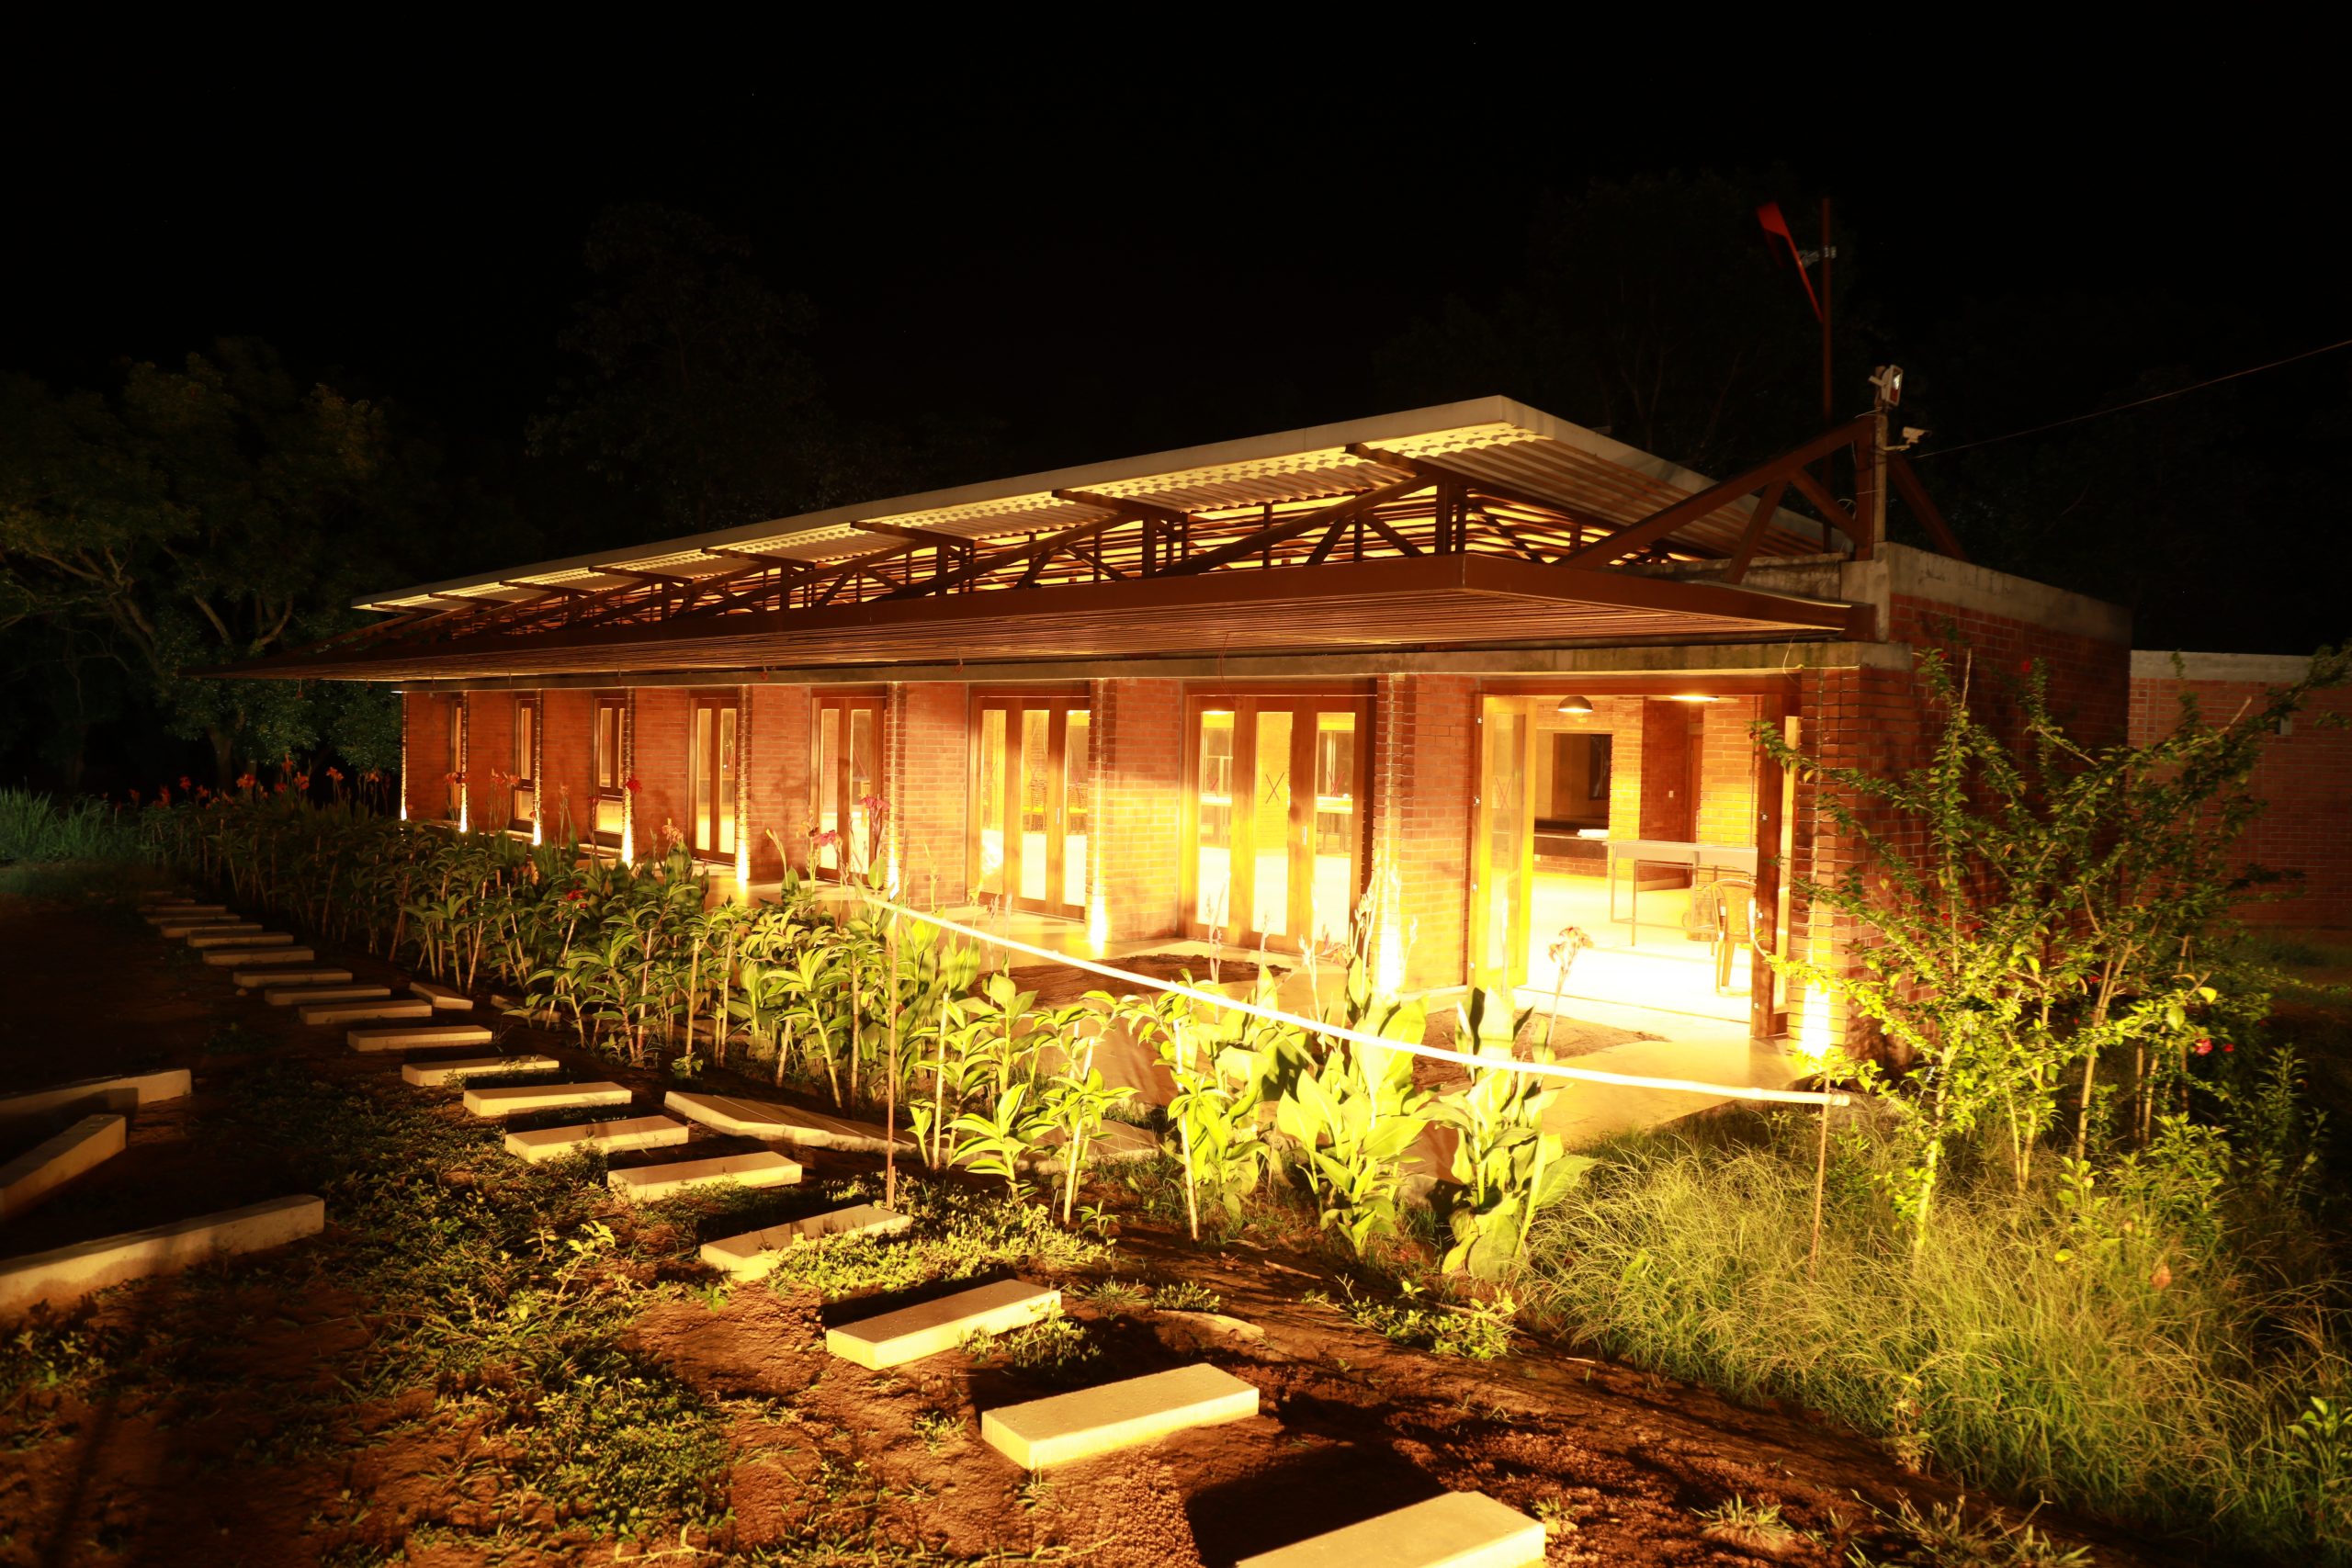 CCDB Climate Centre at Night